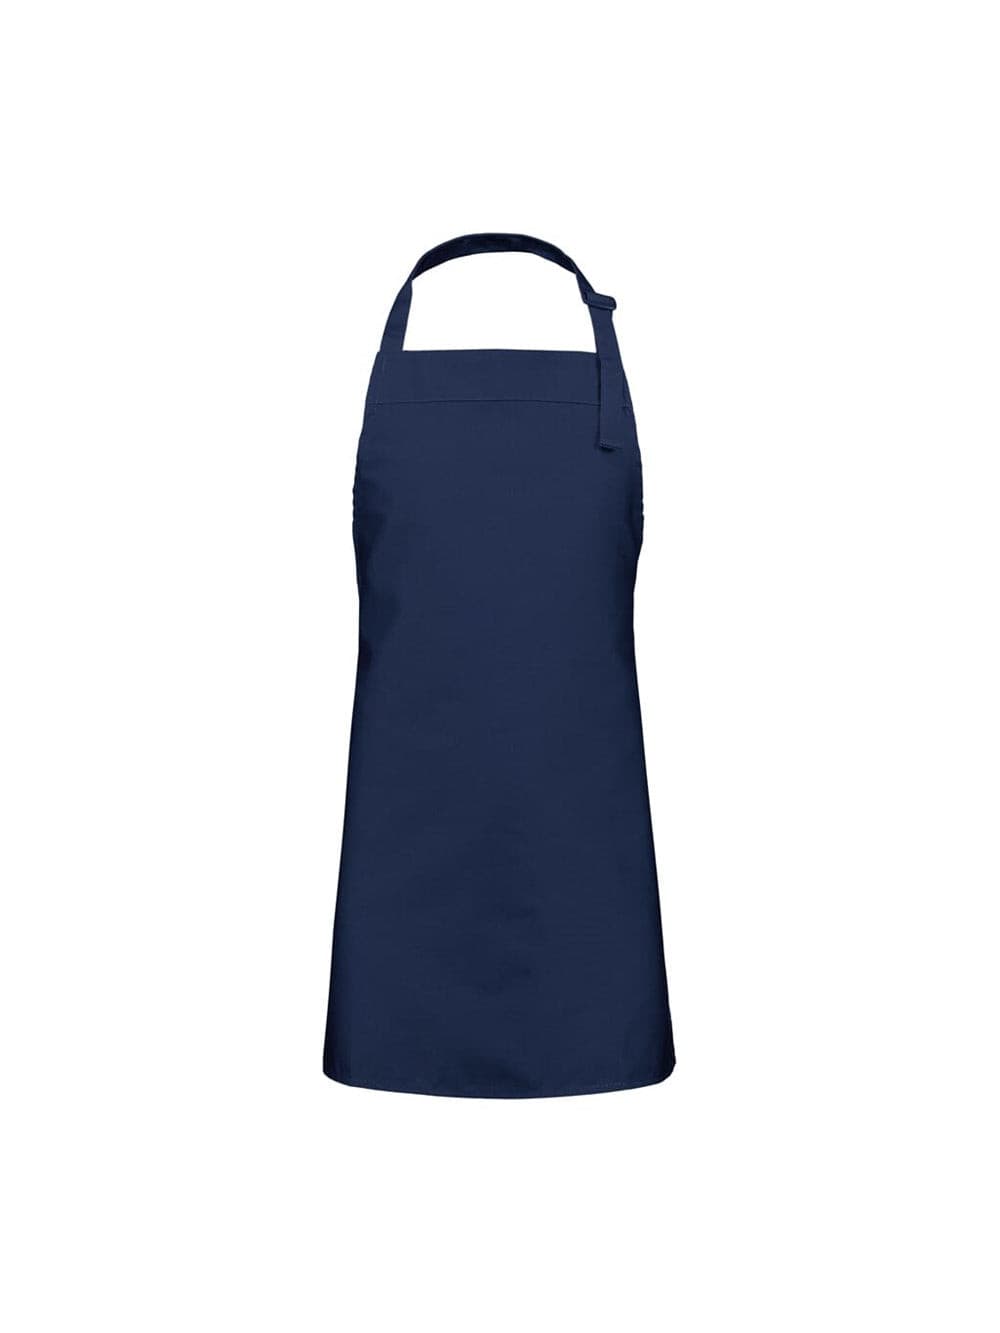 Bib Apron Kids Navy by The Little Chef Collection -  ChefsCotton